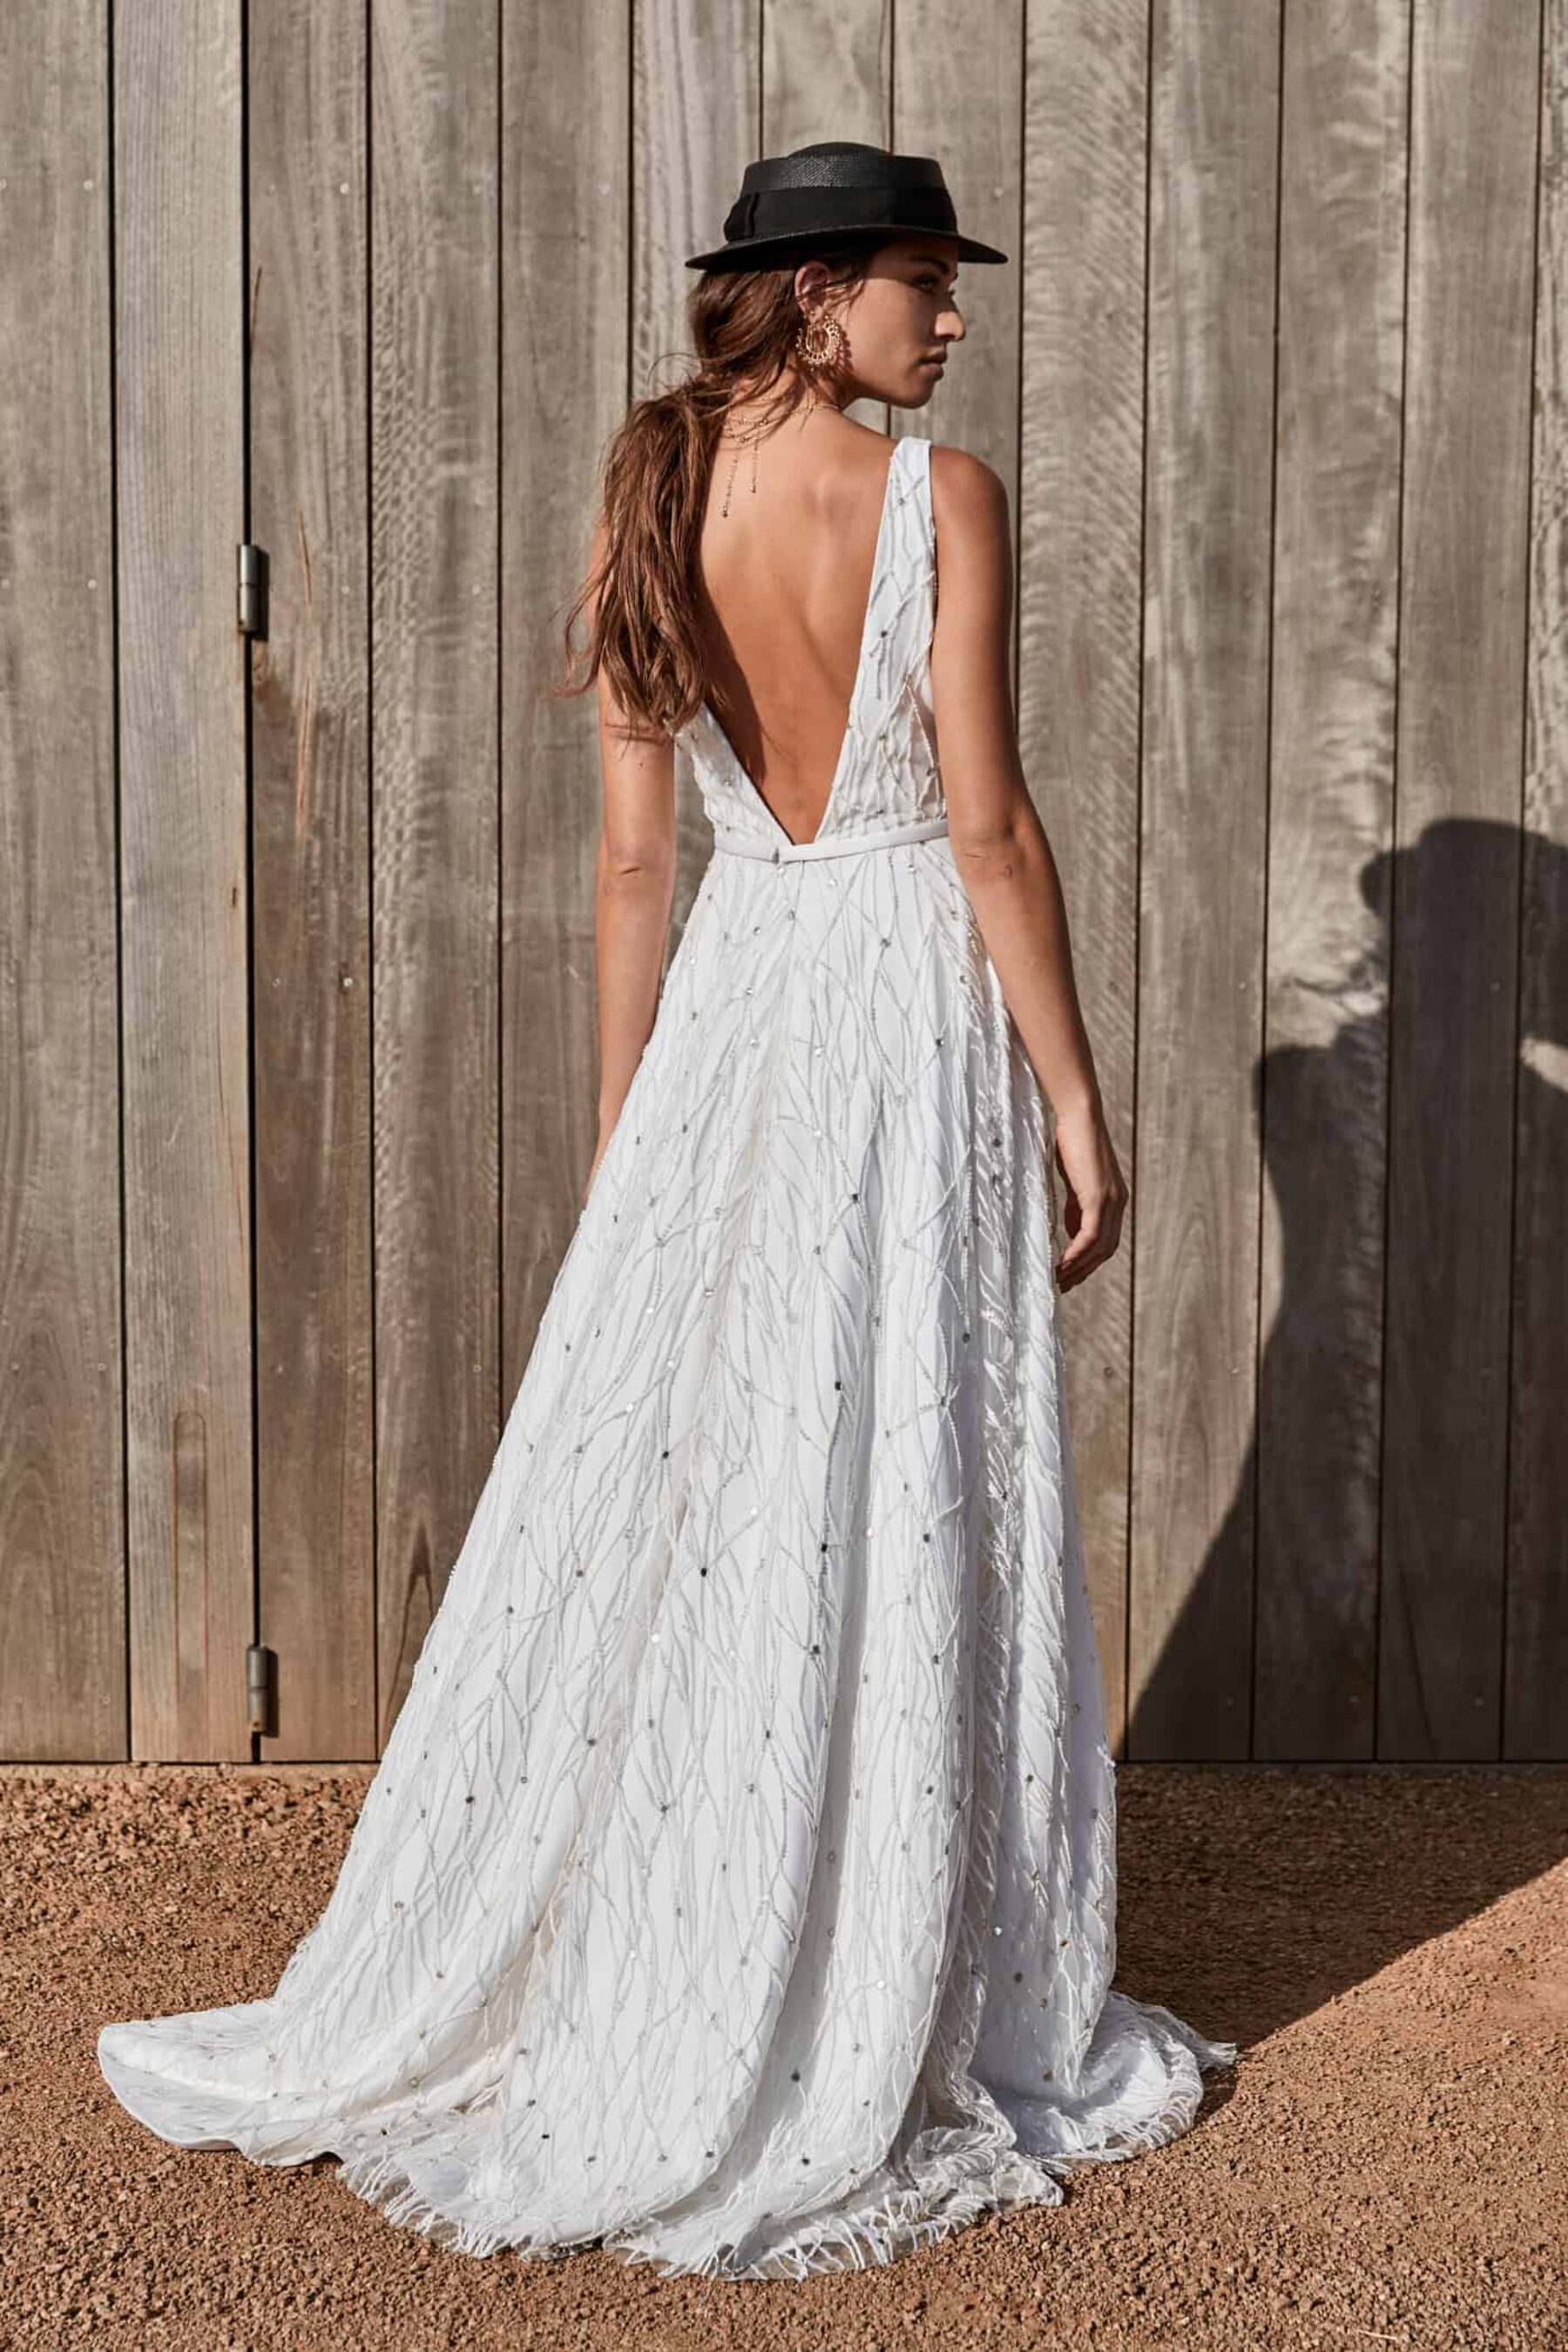 2018 collection by CHOSEN by One Day Bridal